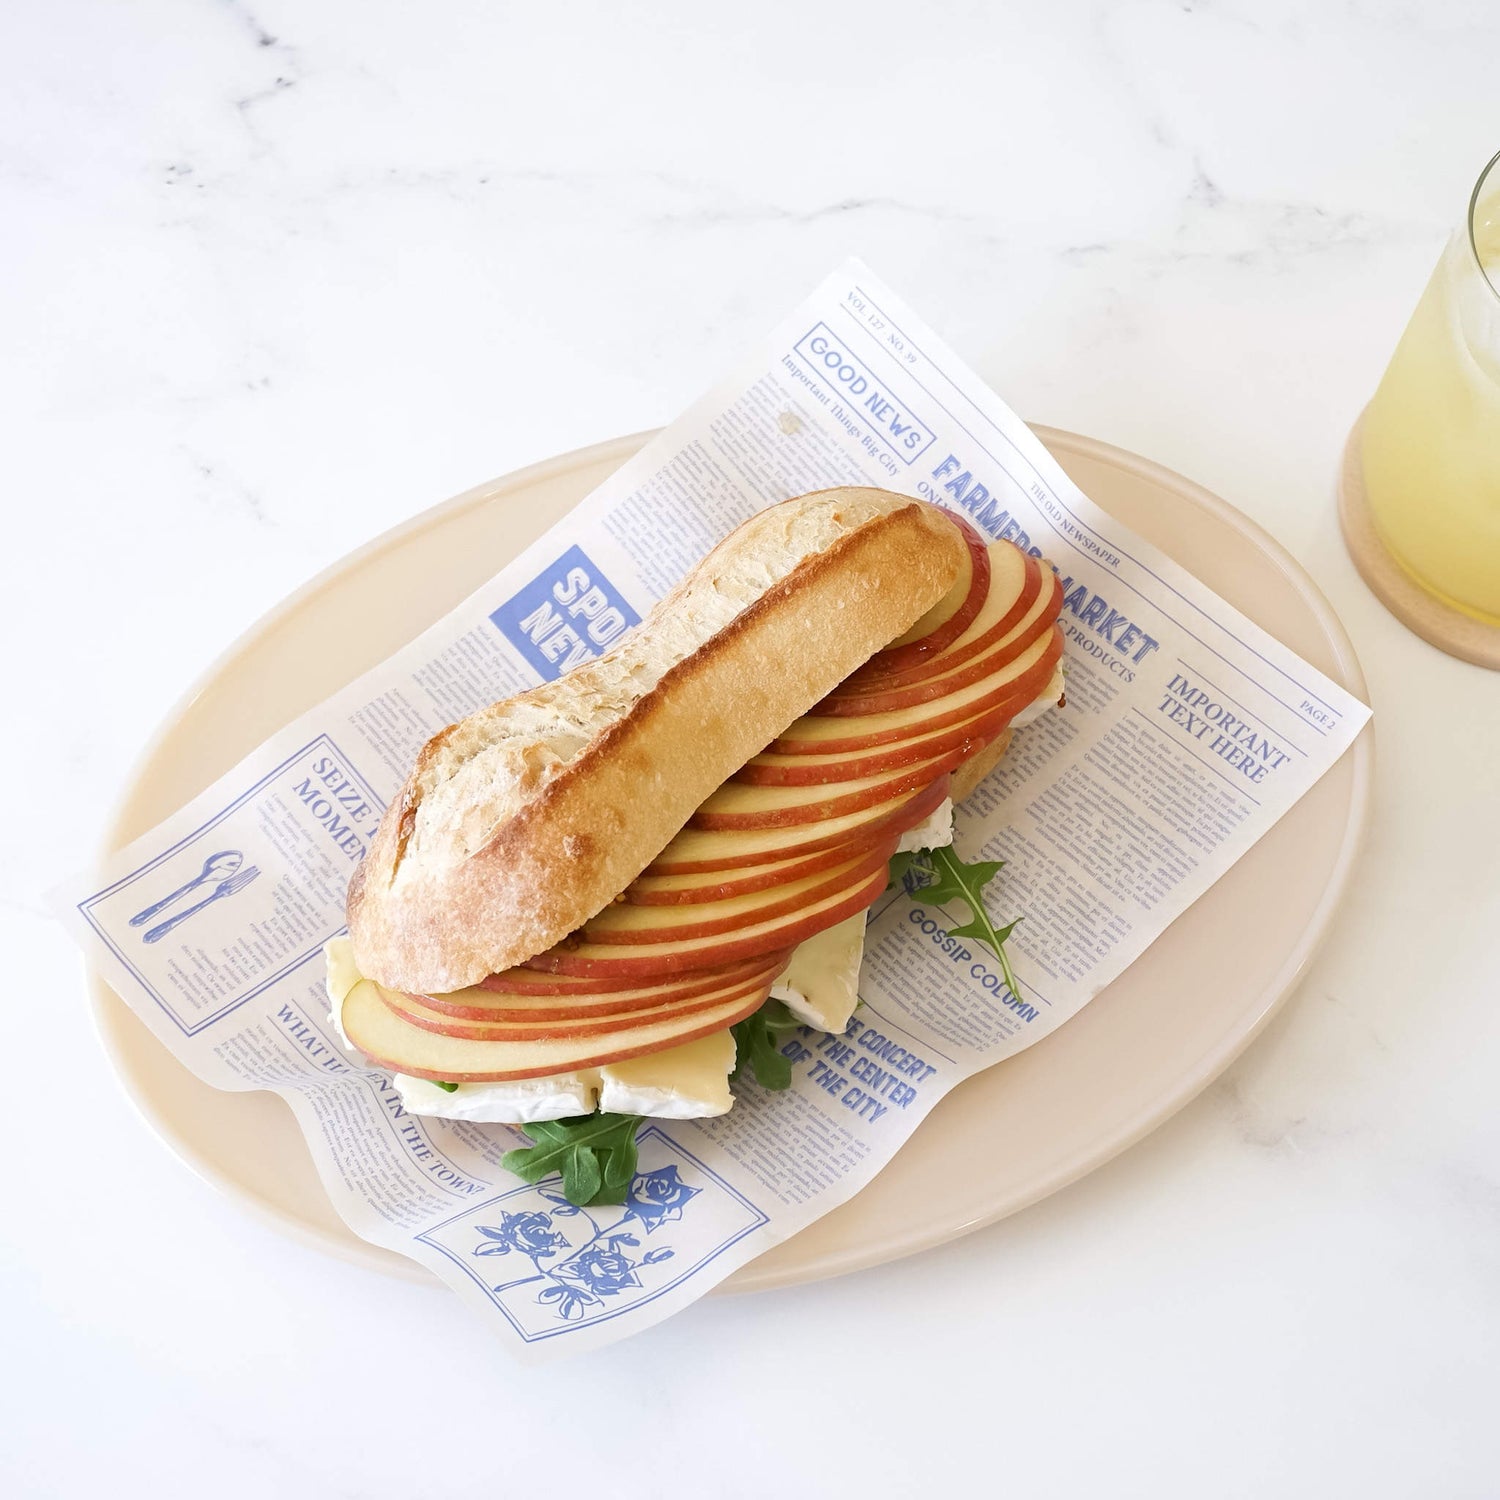 apple brie cheese sandwich on newspaper printed deli paper in blue